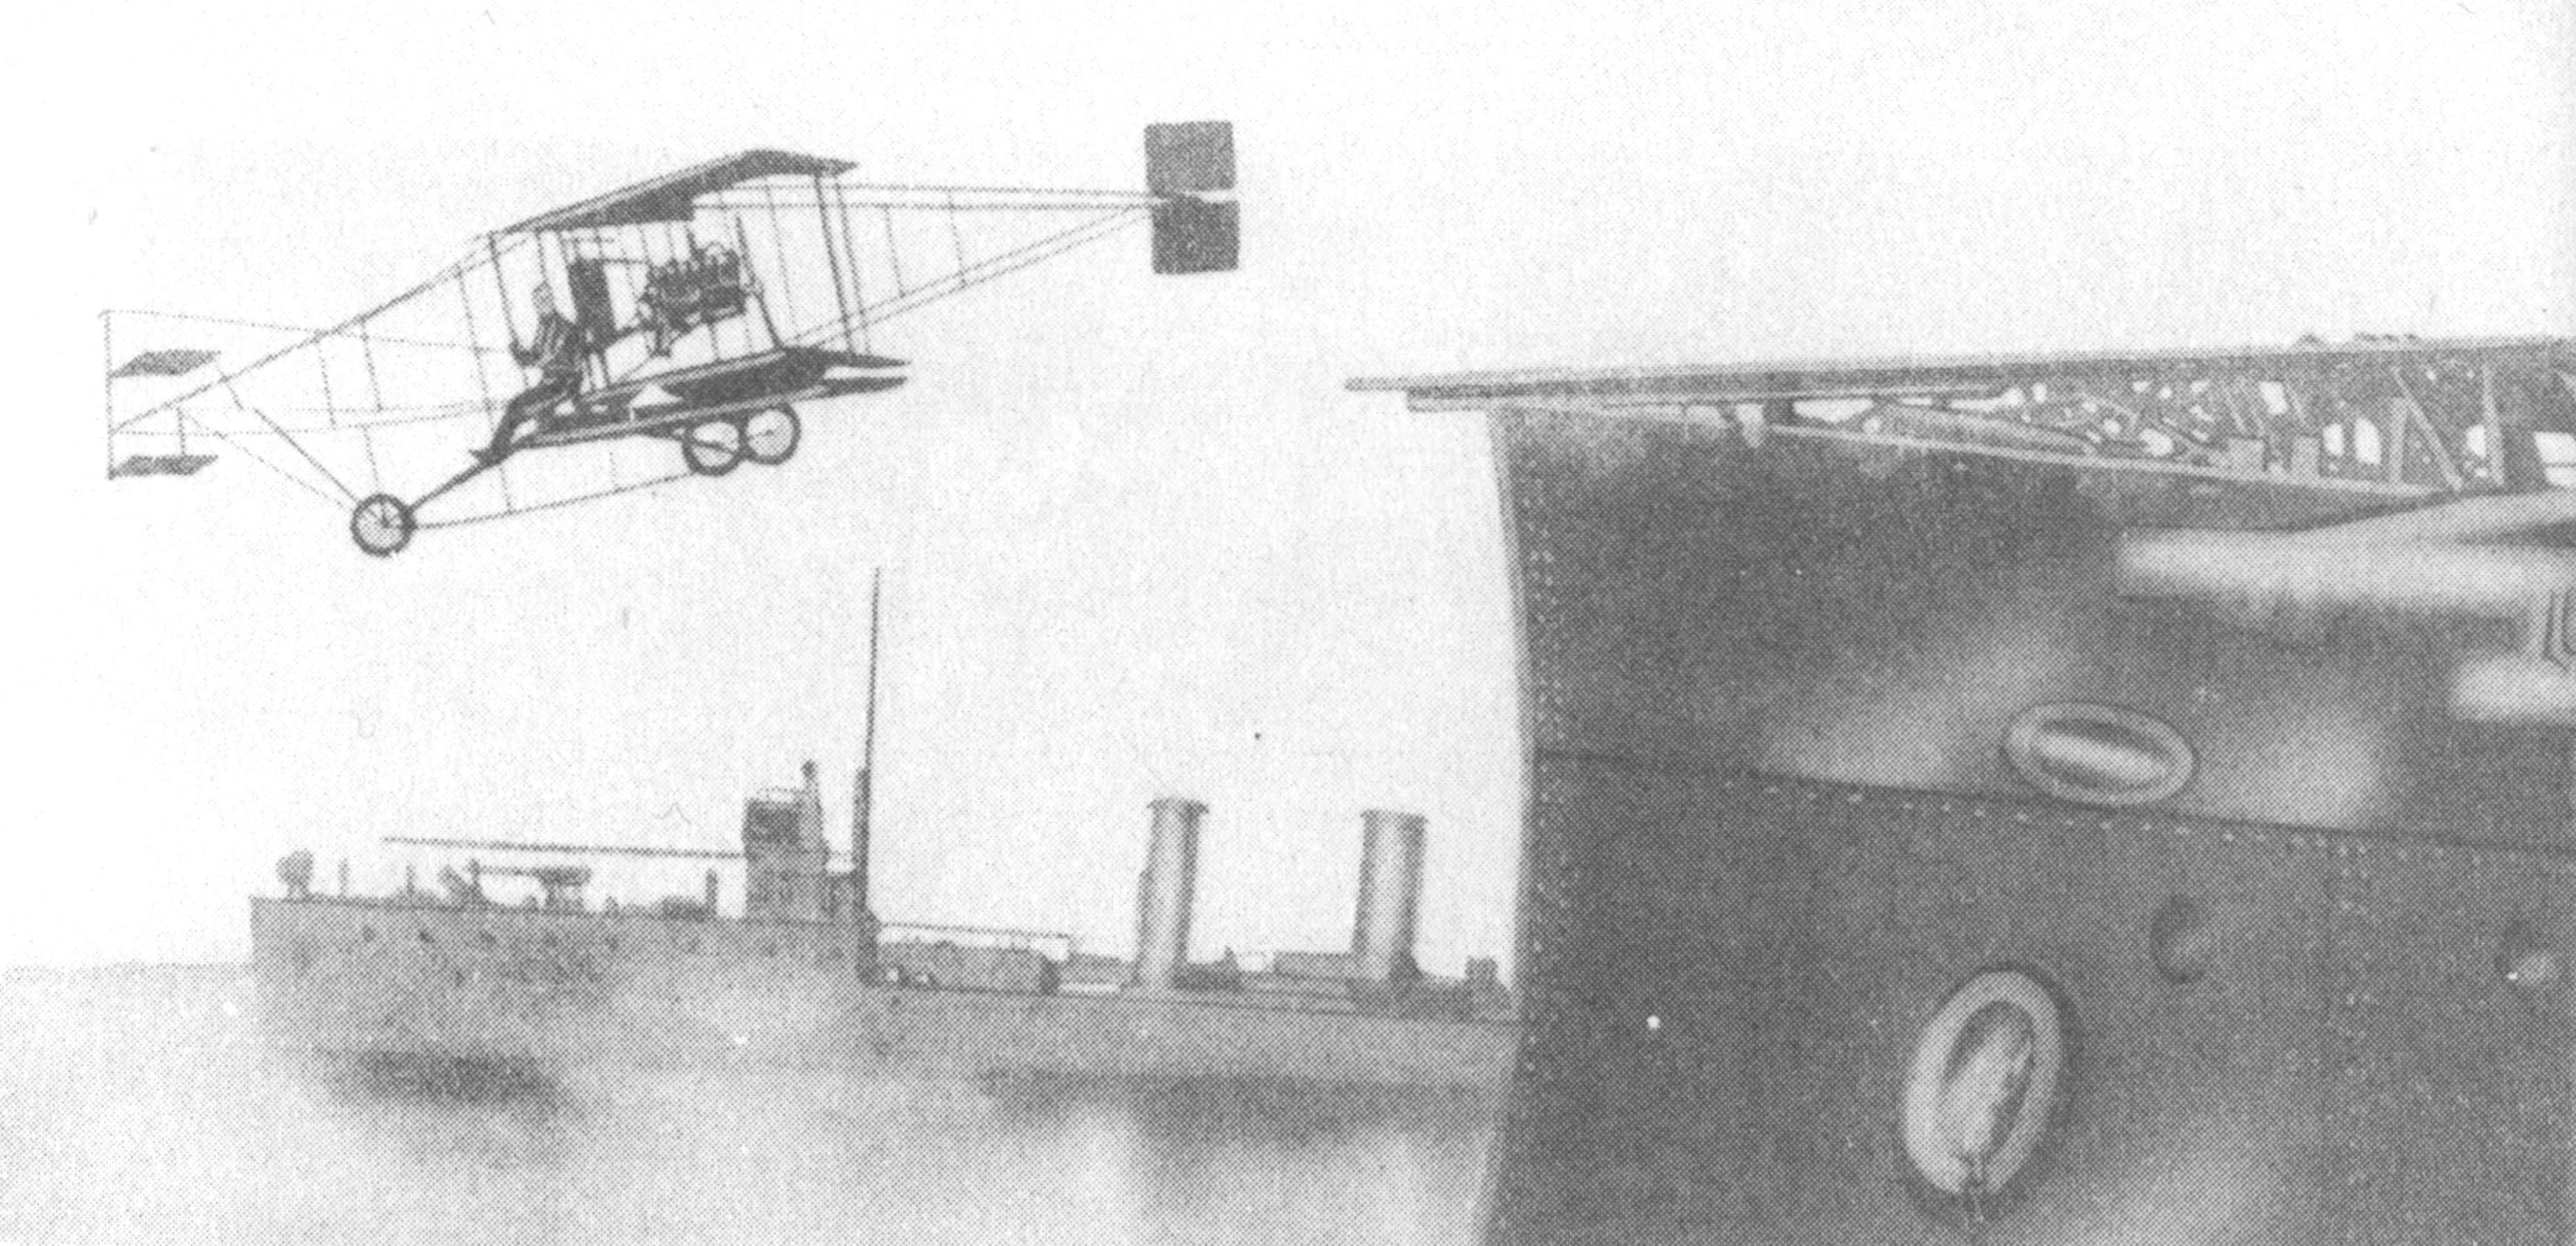 In 1910, Eugene Ely made the first takeoff from a ship at sea.